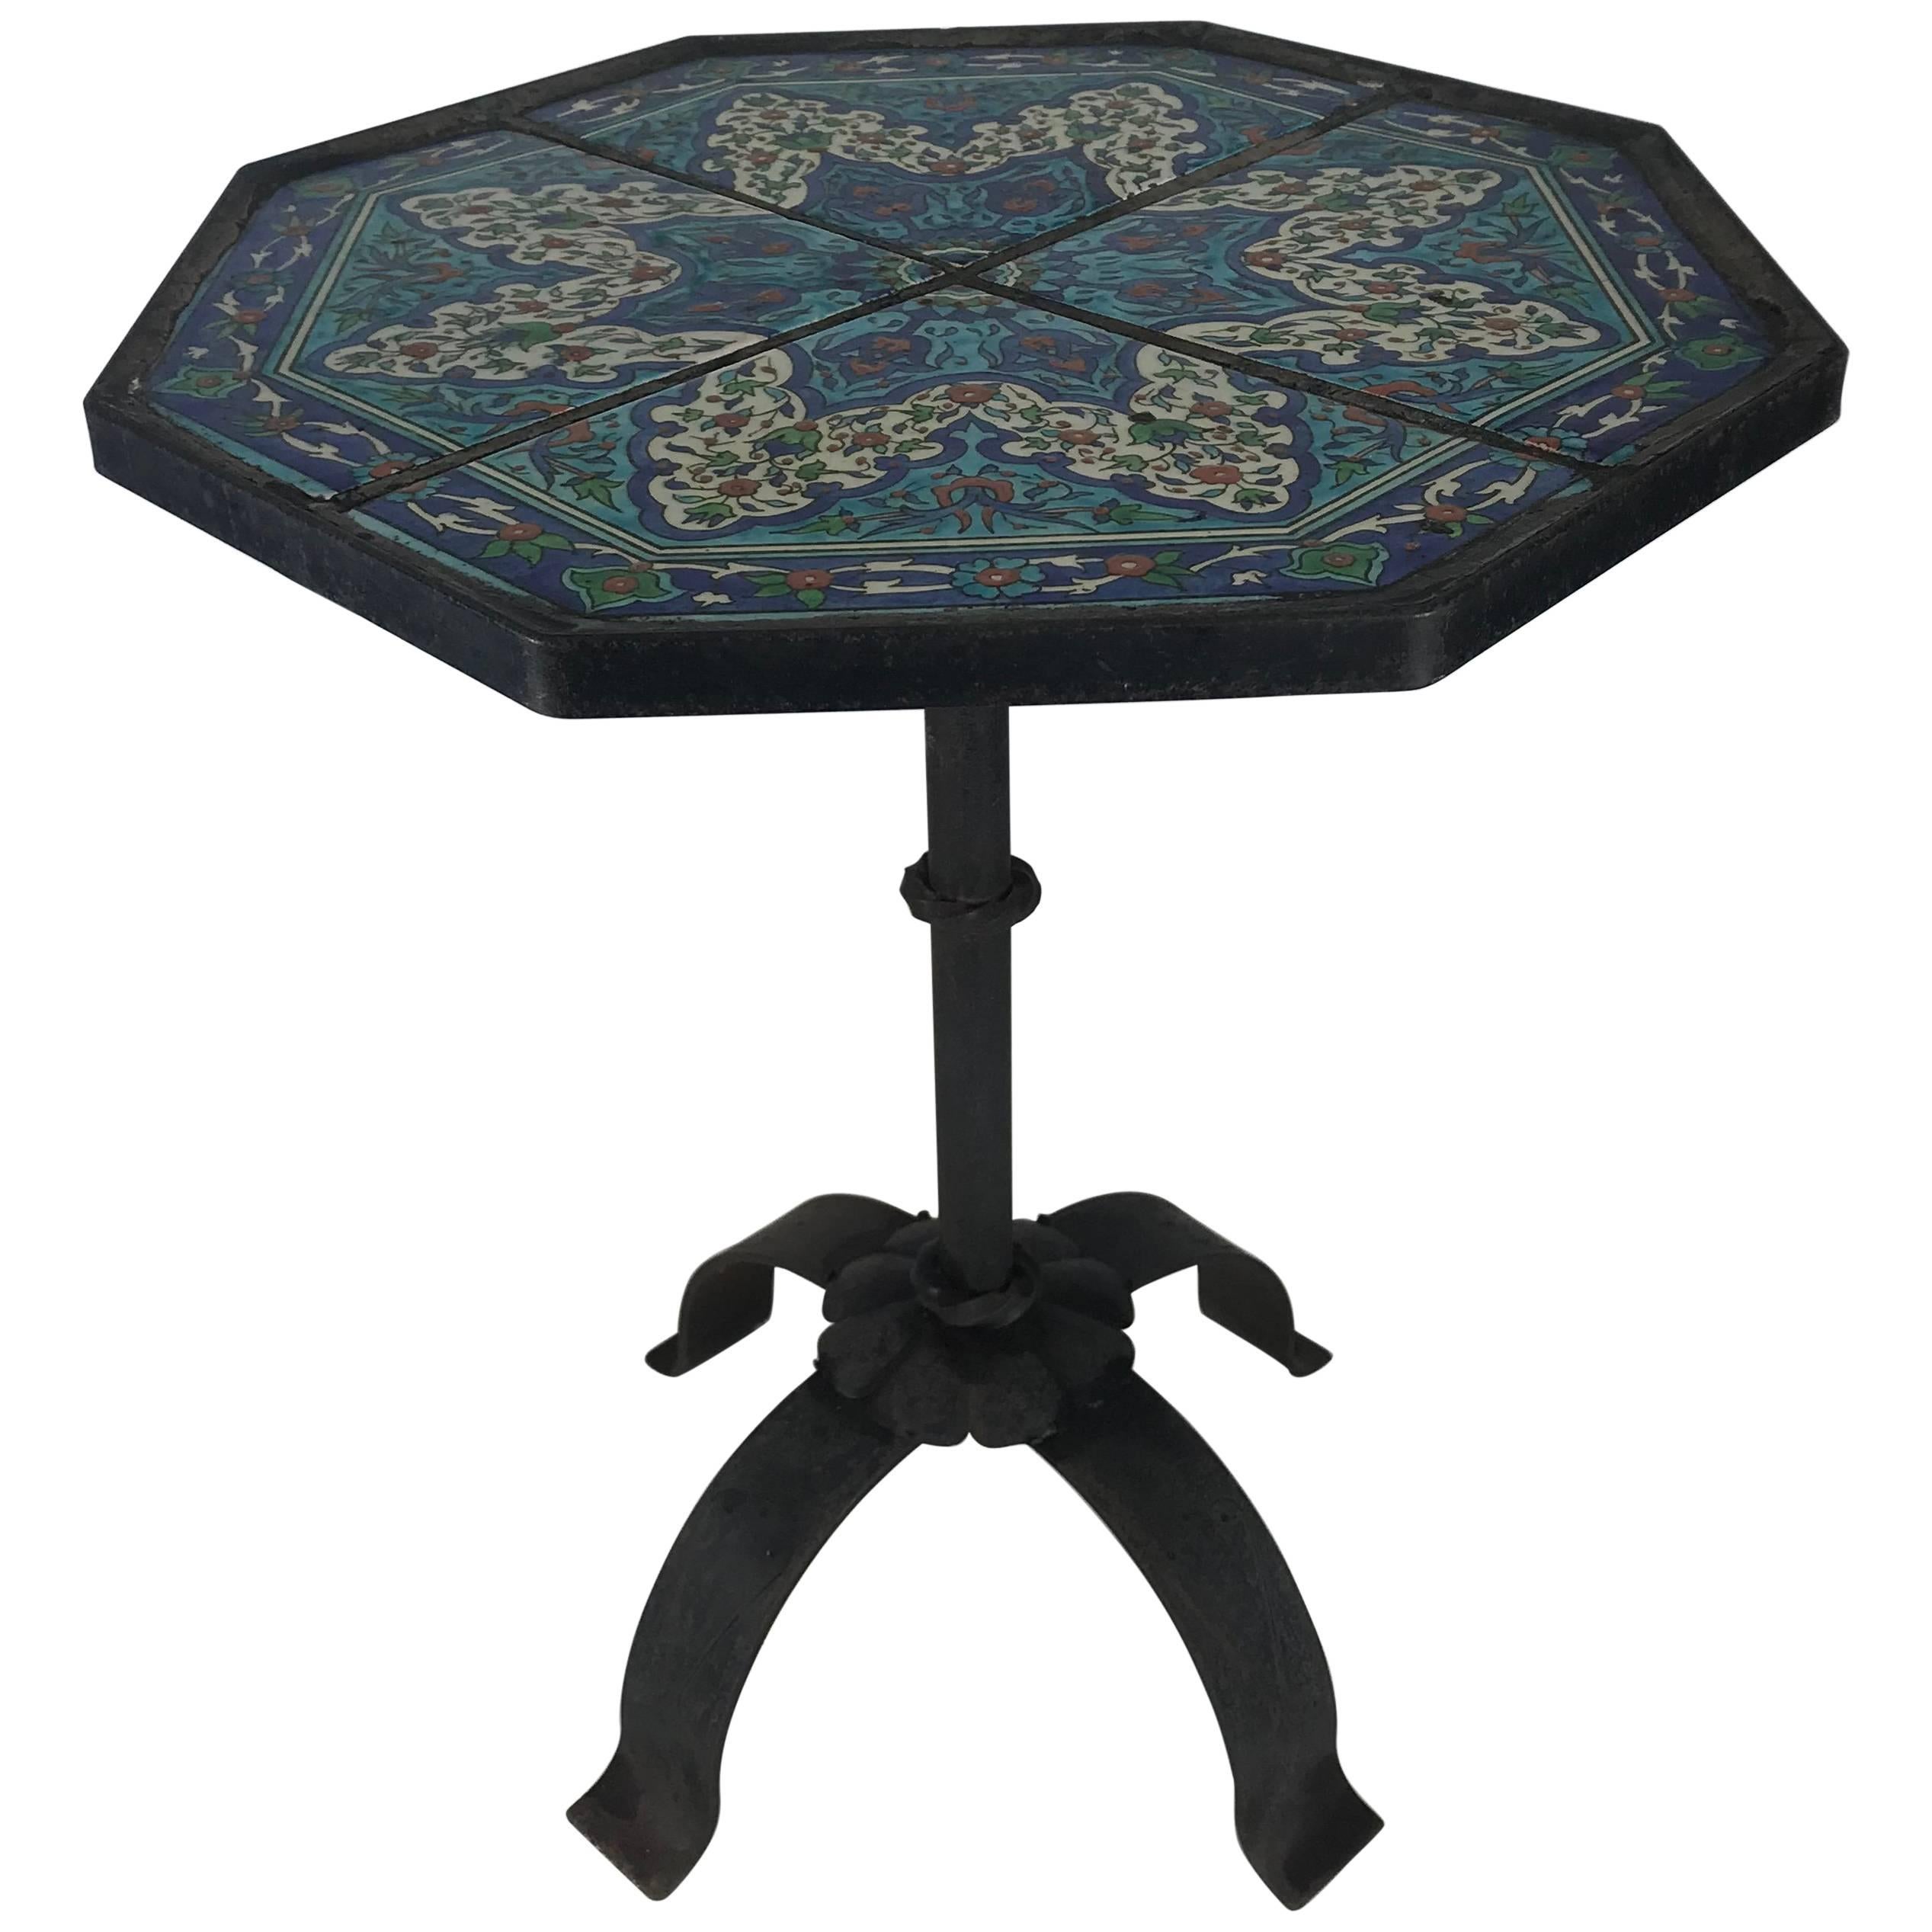 Stunning Persian Tile and Iron Stand or Table